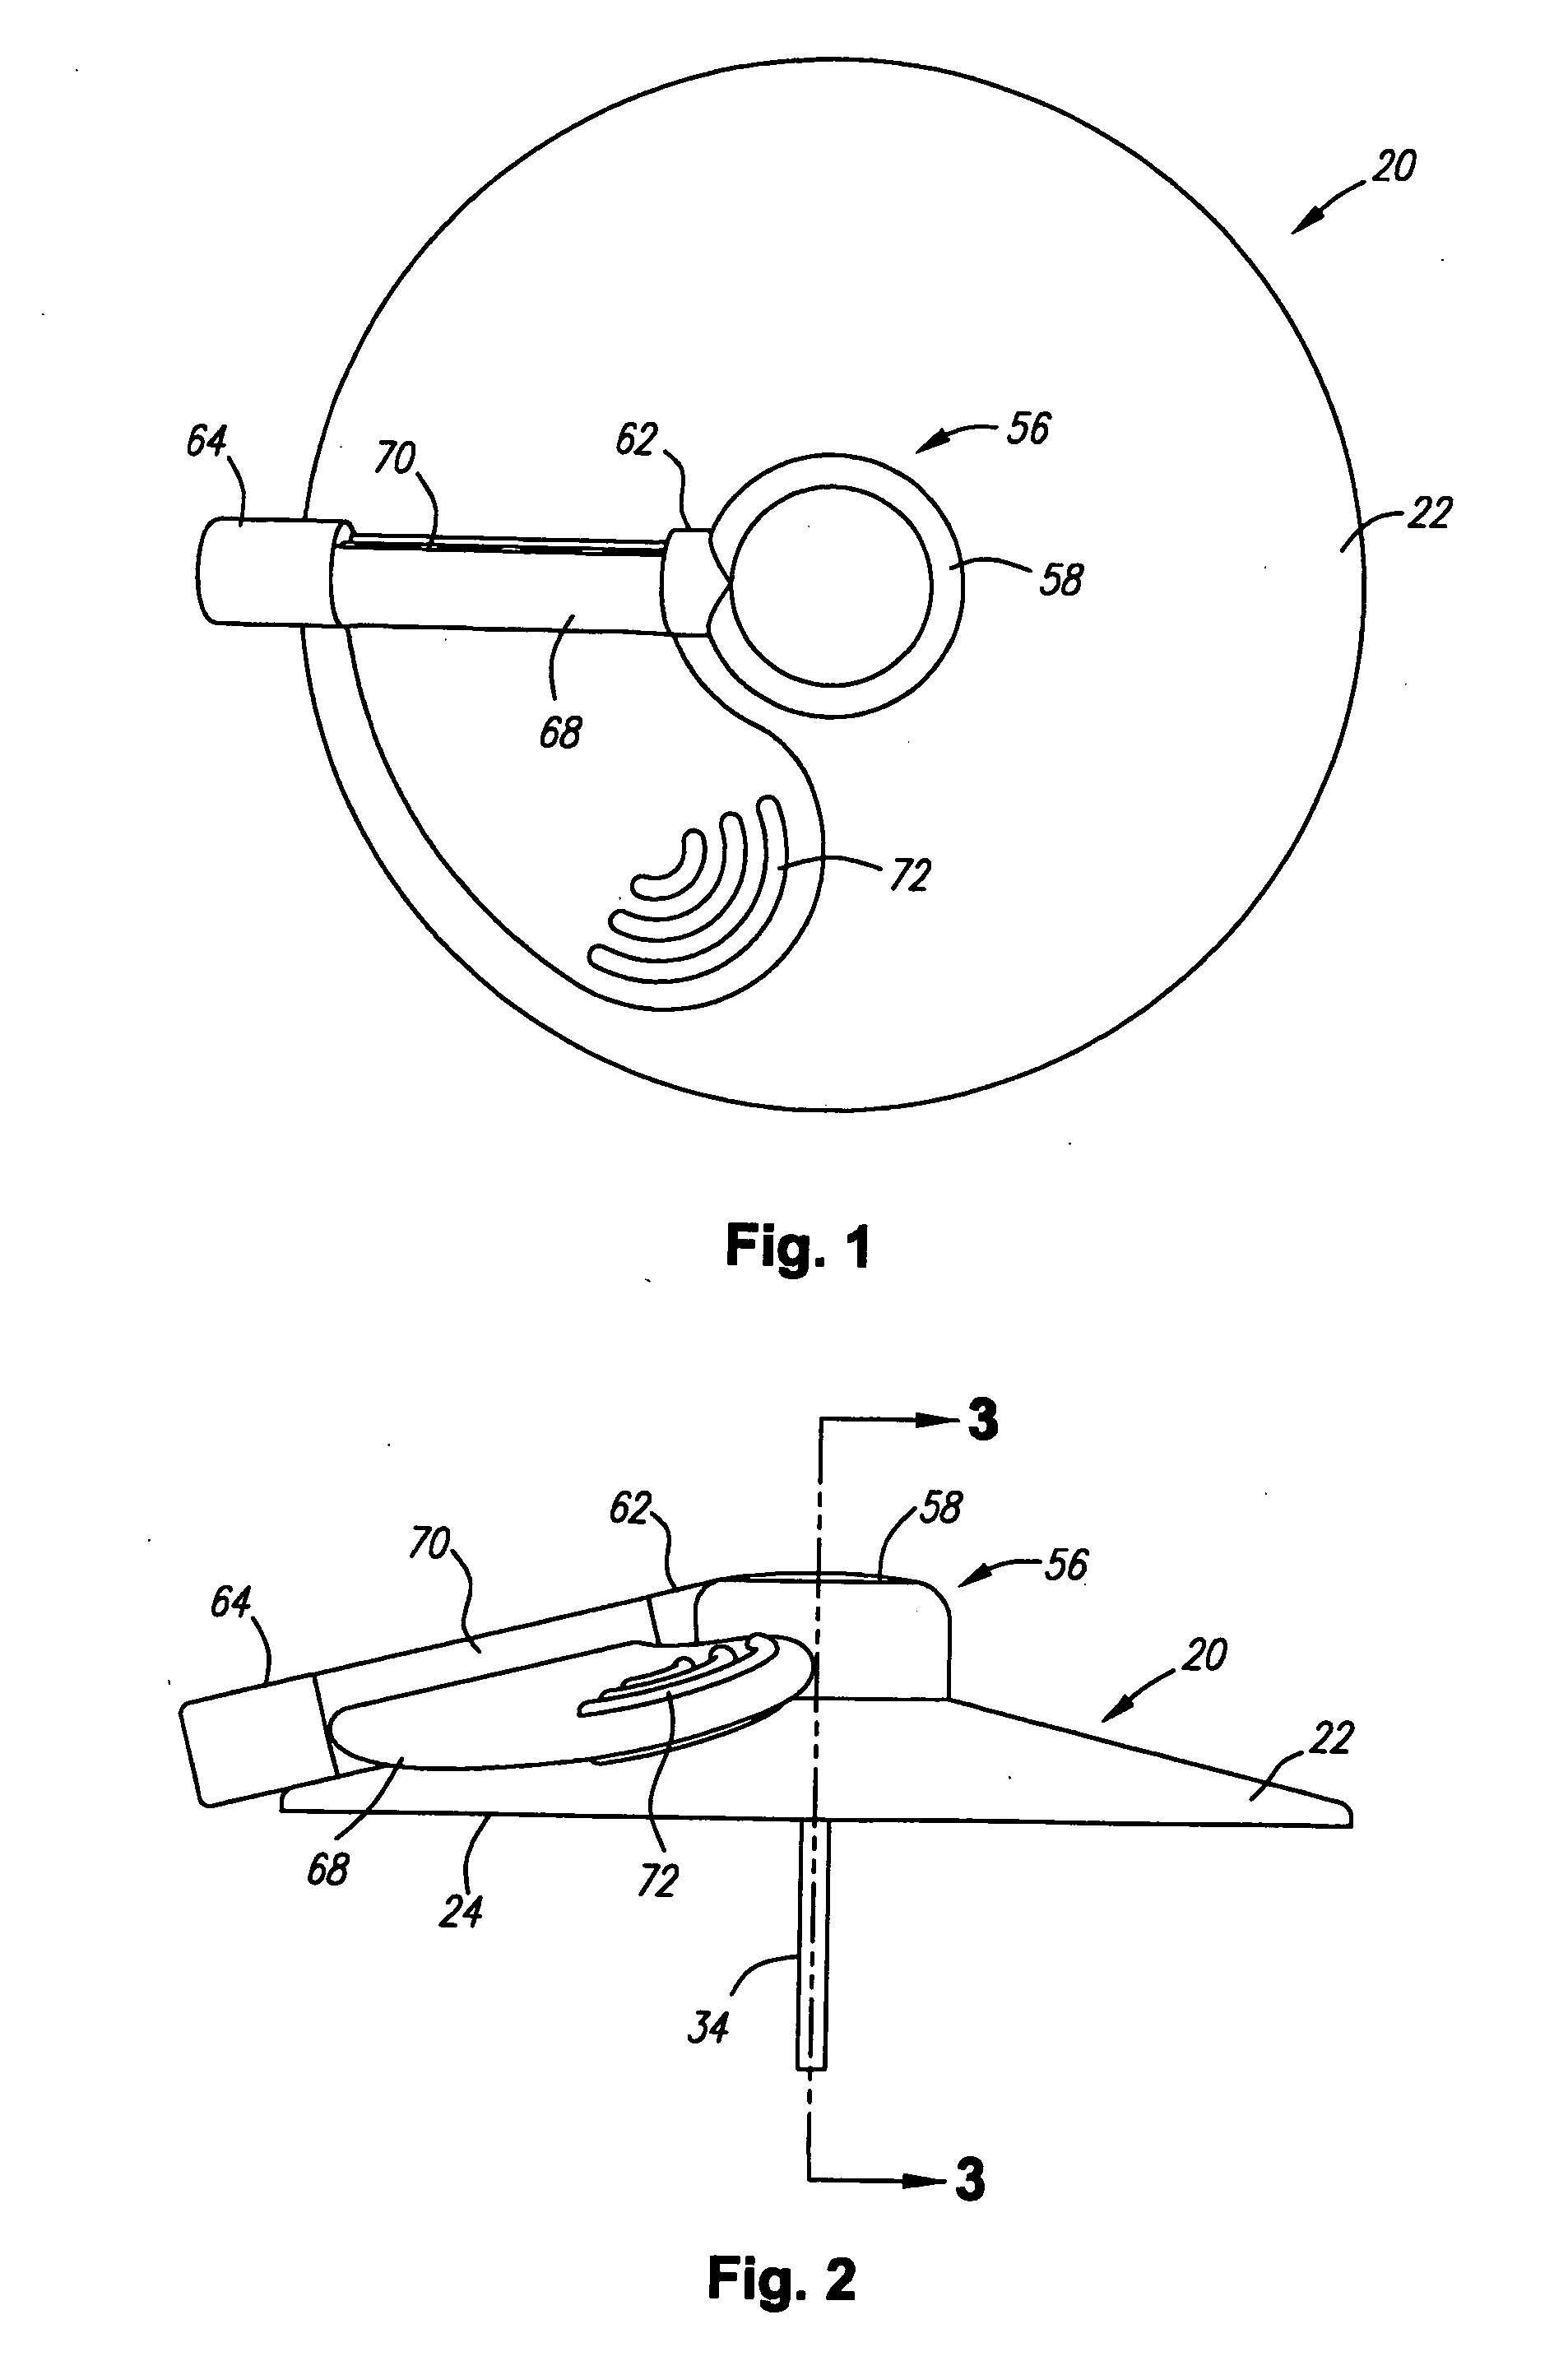 Apparatus for delivery of therapeutic and/or diagnostic agents